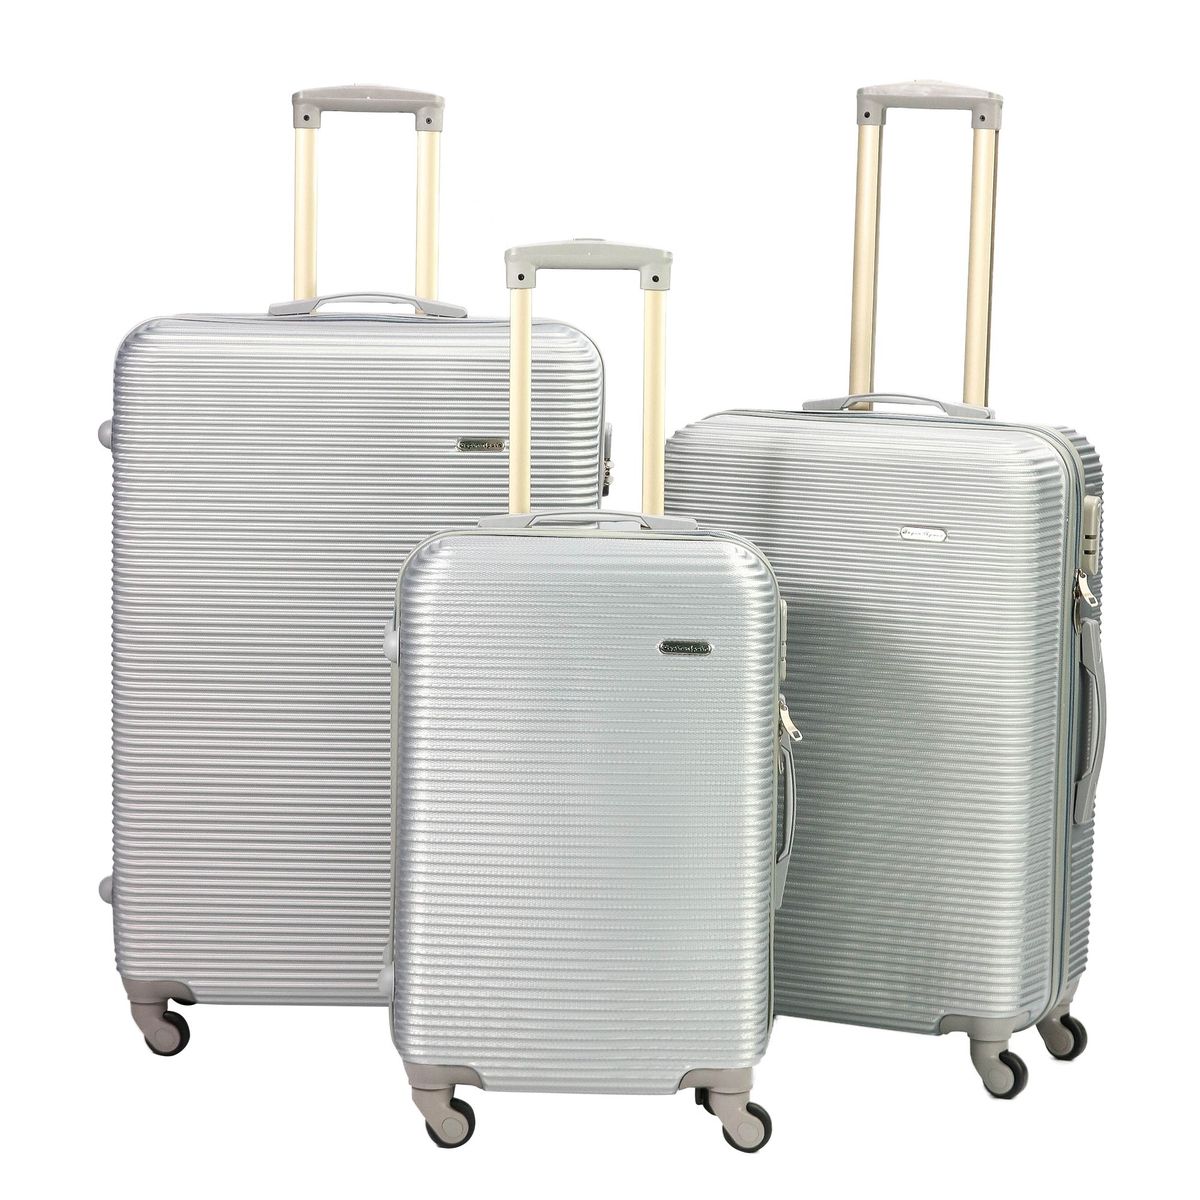 Expert Travel Ware - 3 Piece Luggage Set - Silver